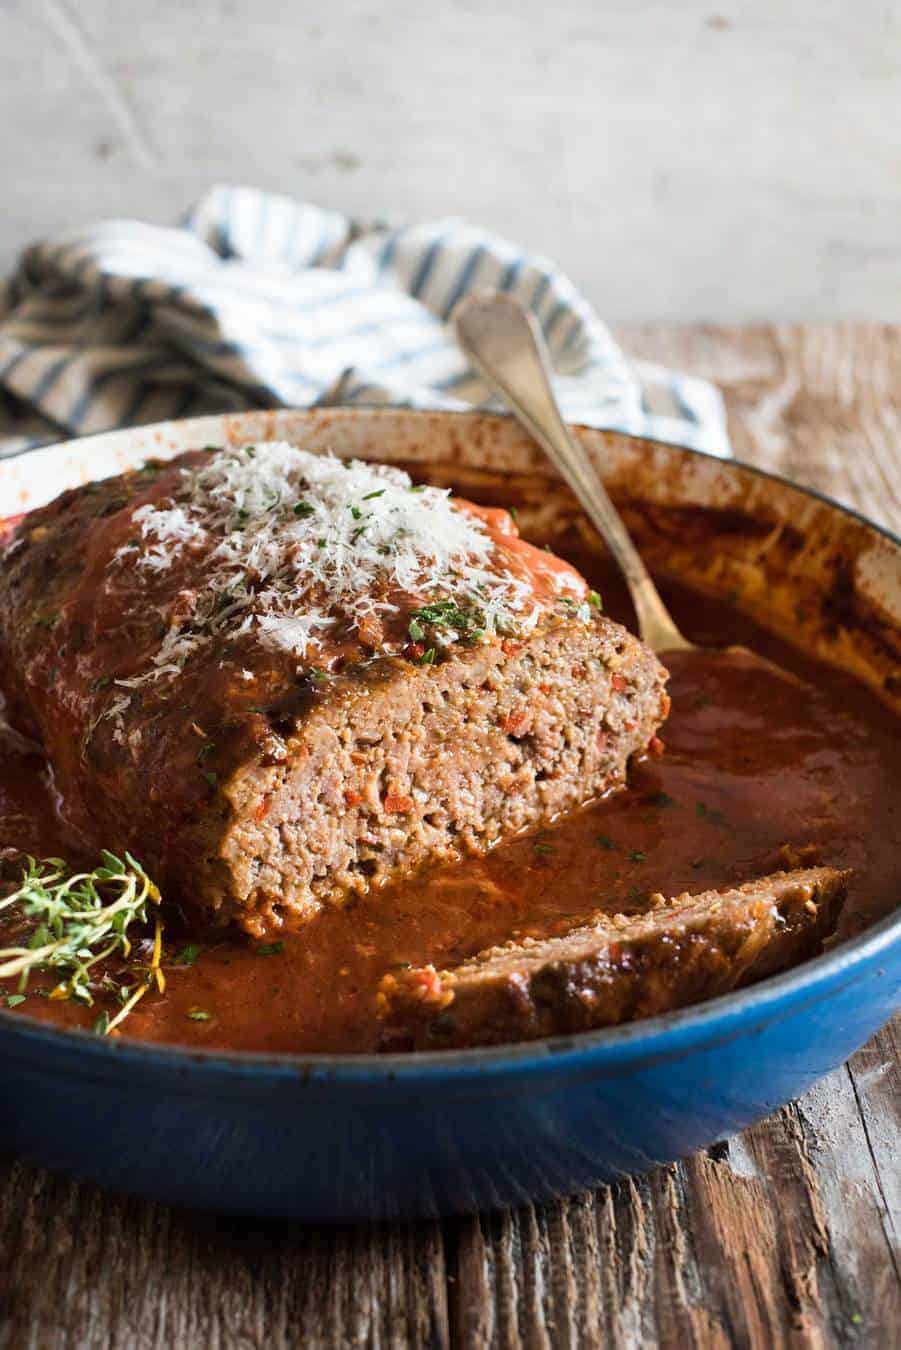 Italian Meatloaf with tomato marinara sauce in a round blue casserole pan with the end sliced off, revealing the juicy inside.